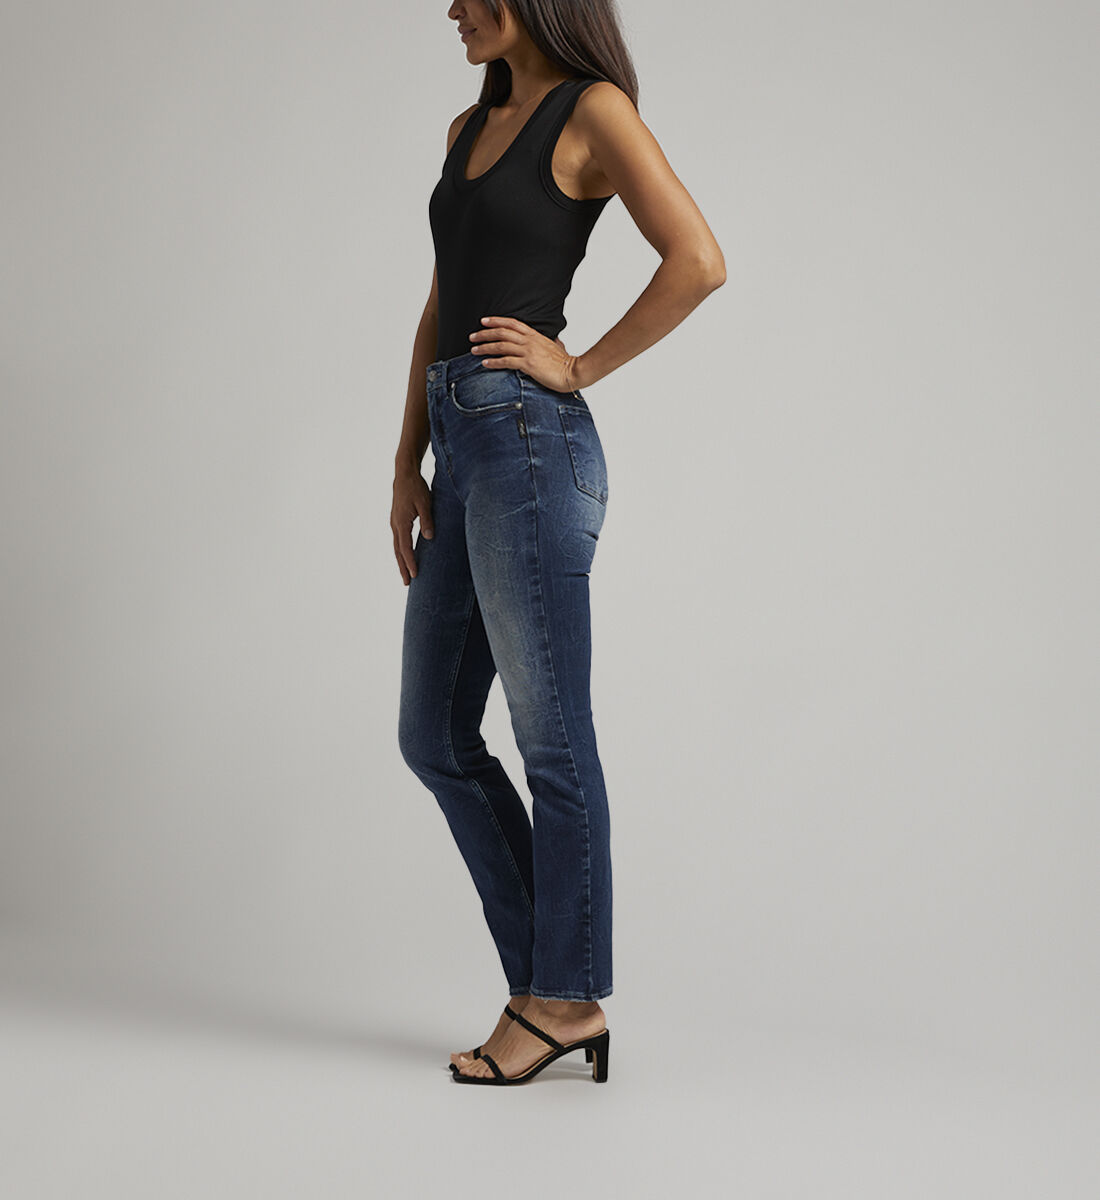 Buy Infinite Fit High Rise Straight Leg Jeans for CAD 88.00 